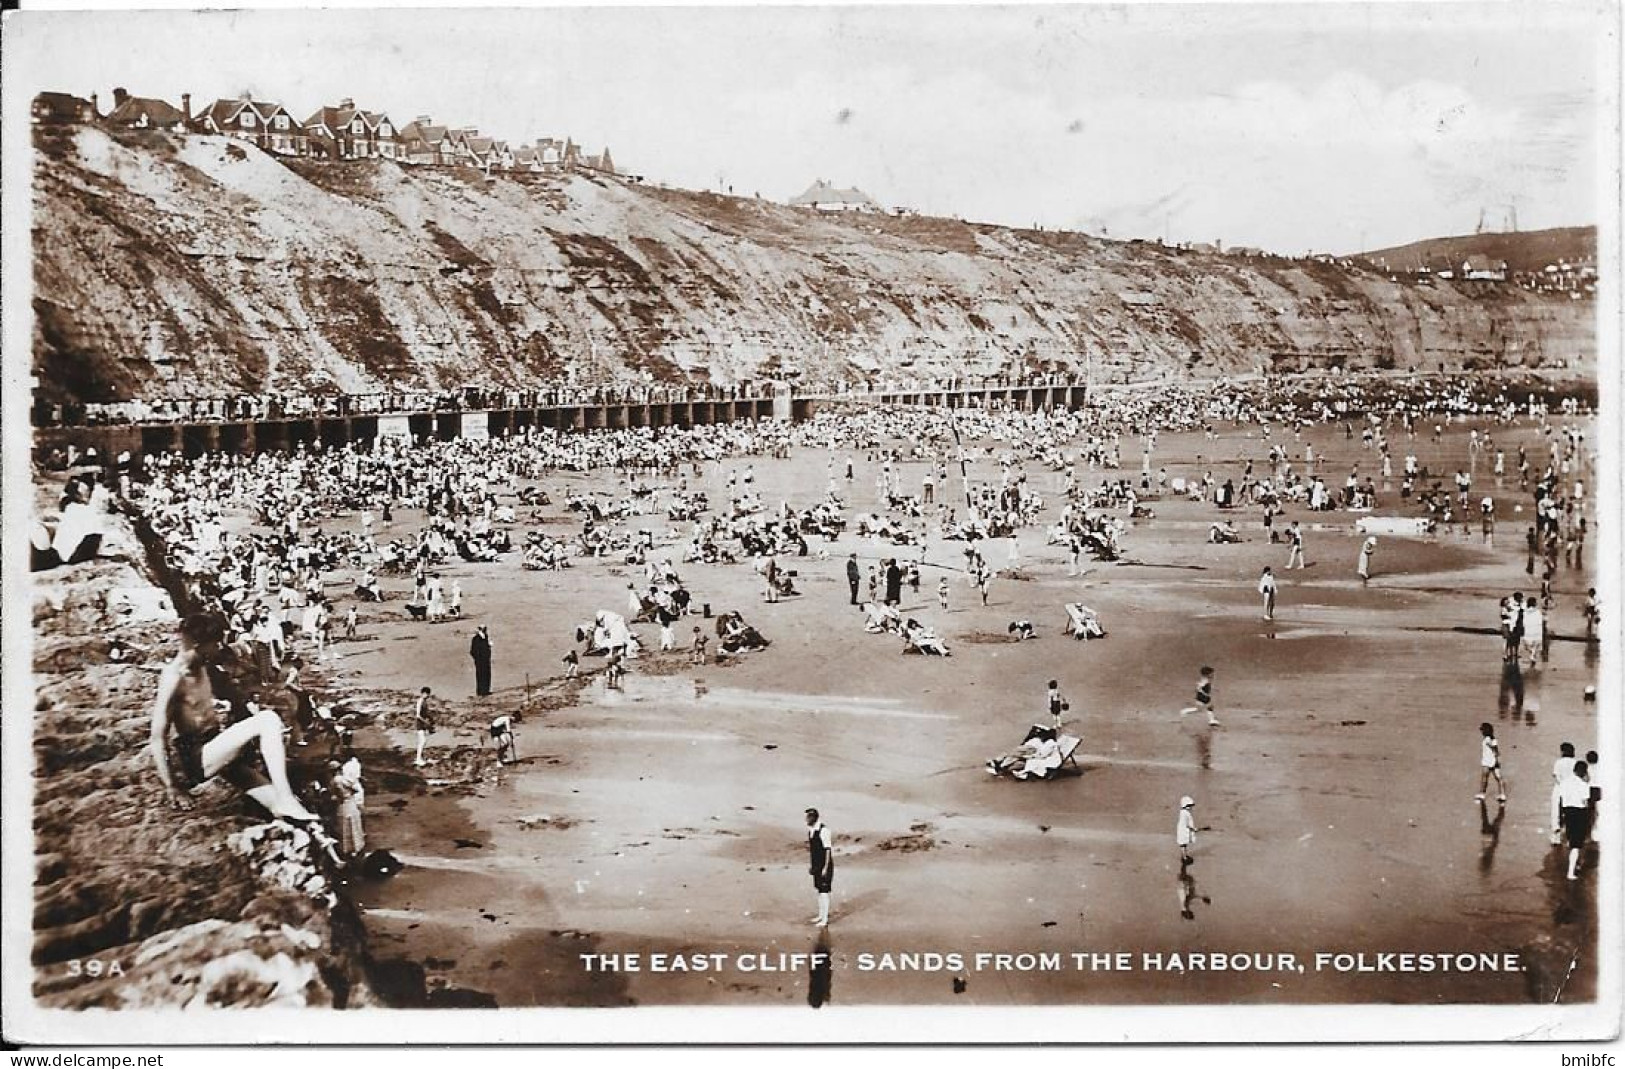 THE EAST CLIFF SANDS FROM THE HARBOUR, FOLKESTONE - Folkestone